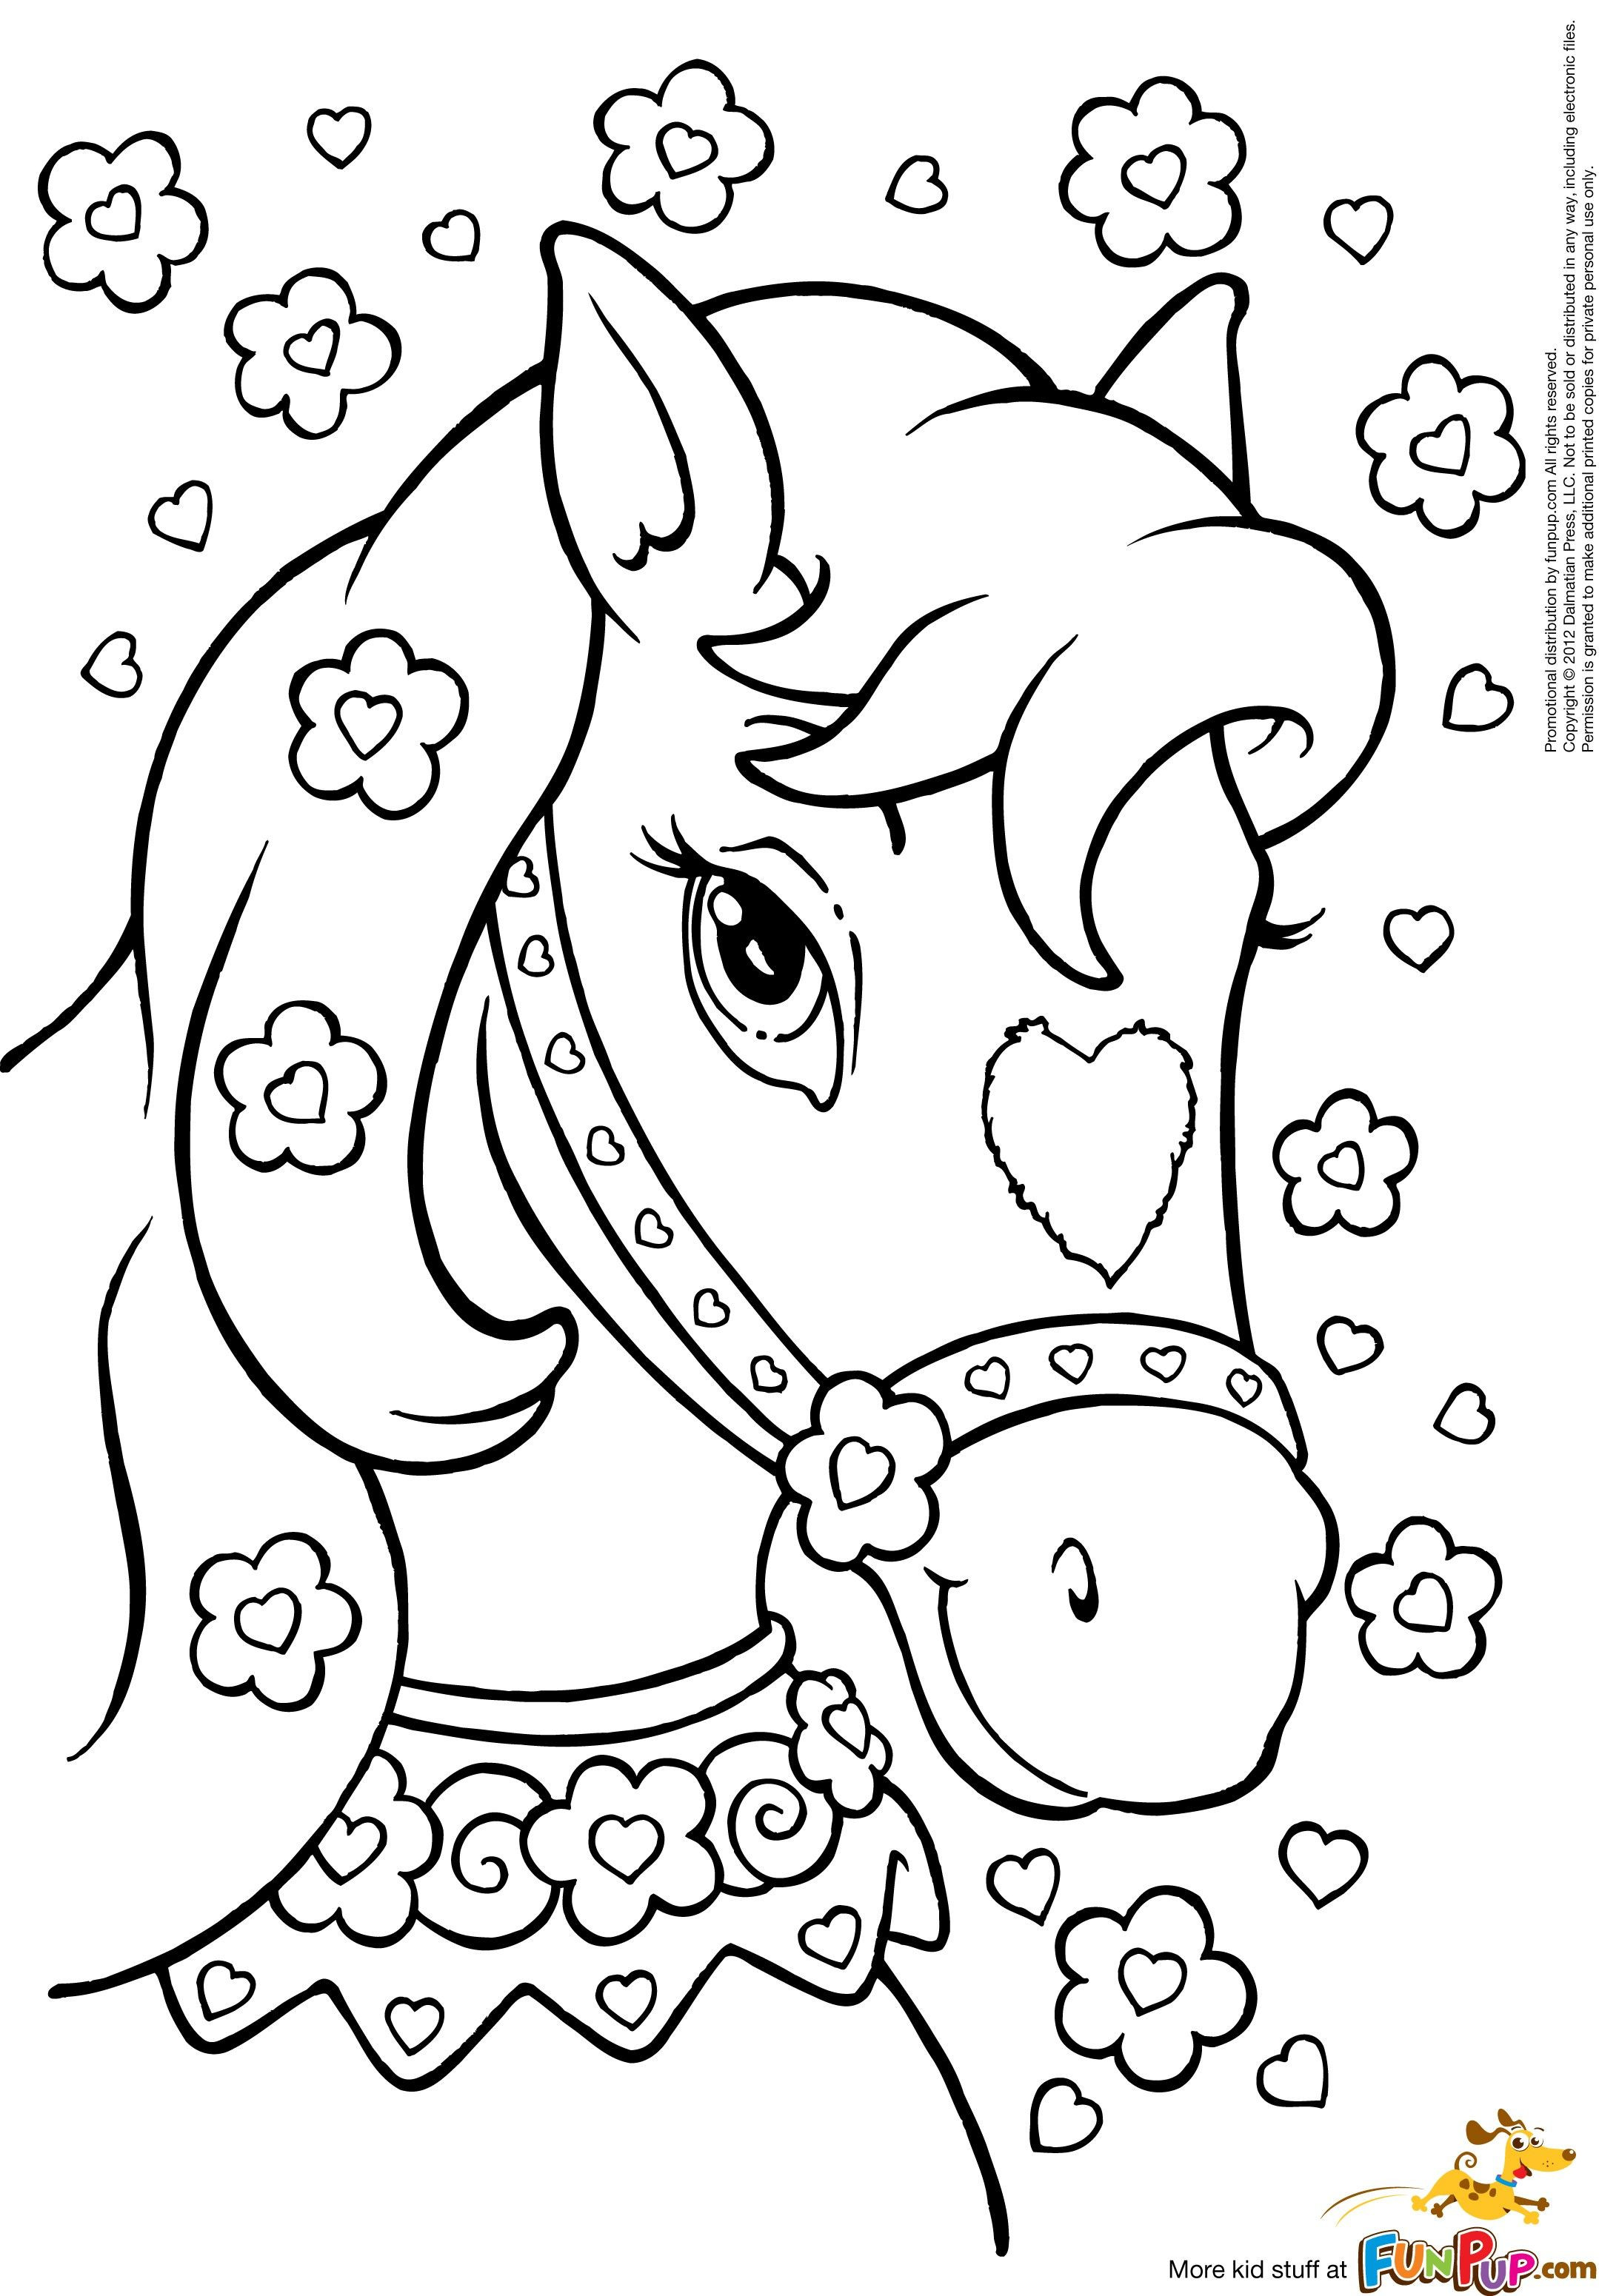 Coloring Pages For Girls Mouted Princess
 printable princess coloring pages